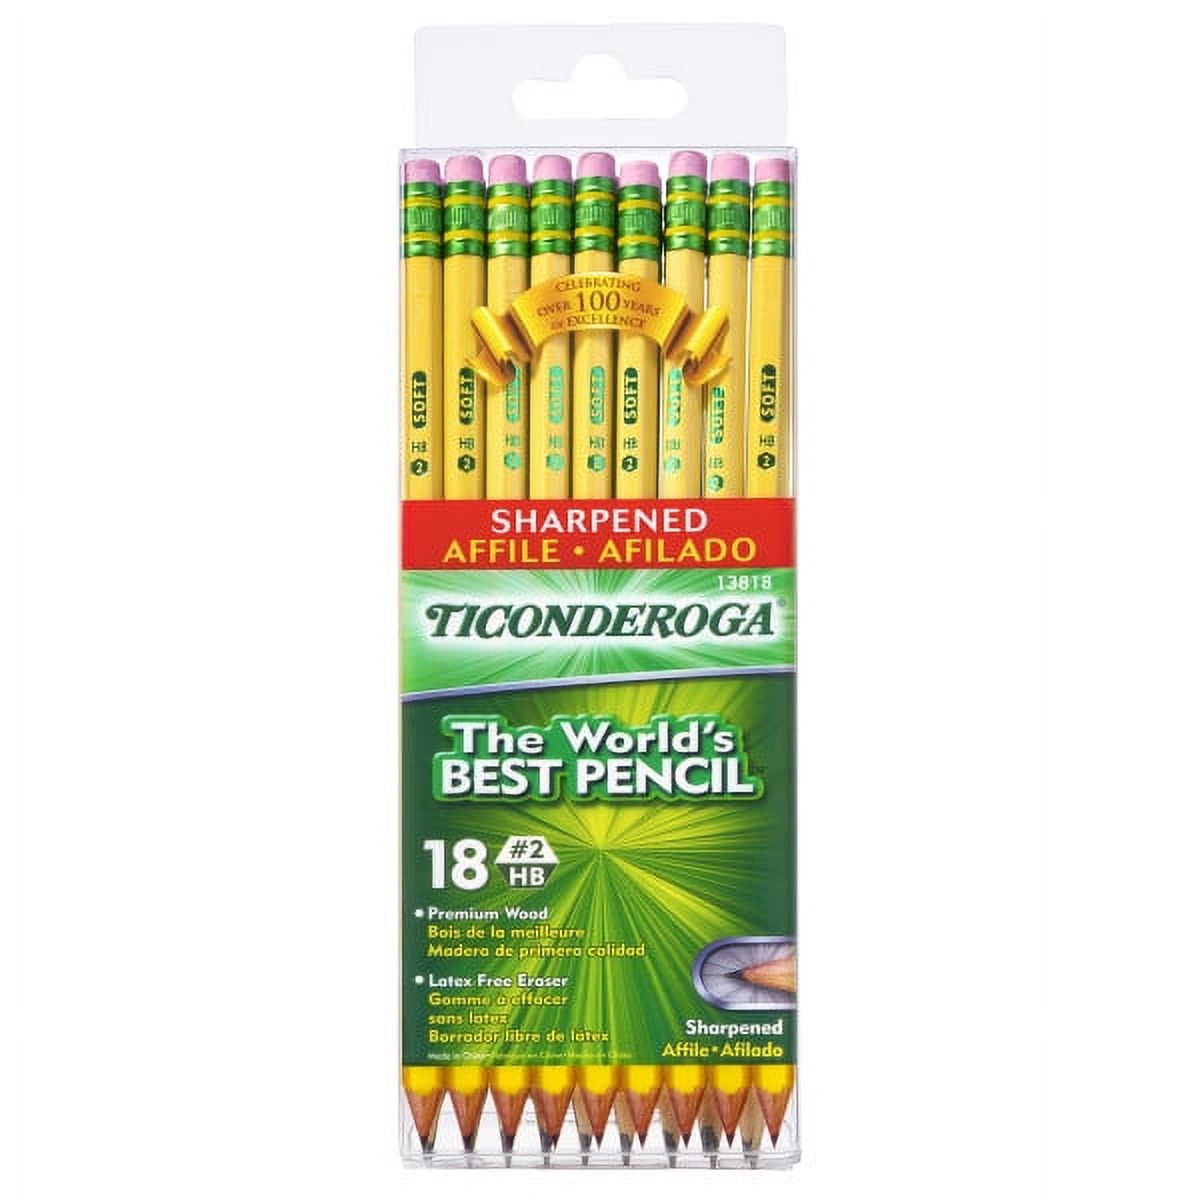 Ticonderoga 13818 #2 Sharpened The World's Best Pencils 18 Count (Pack of 1) - image 1 of 7